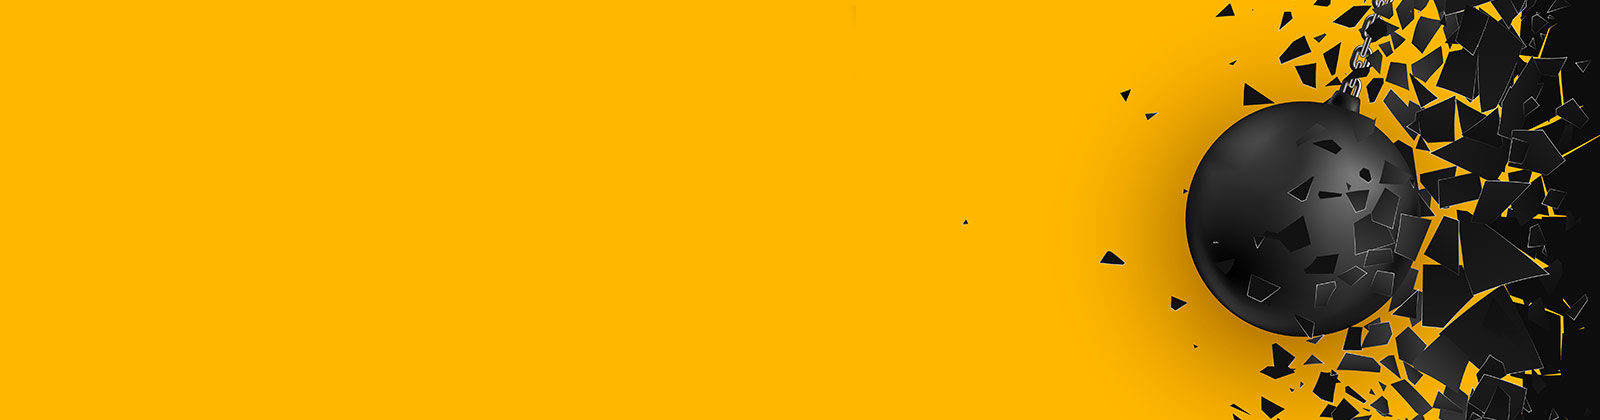 A breaking ball, busting through a black wall on a yellow background